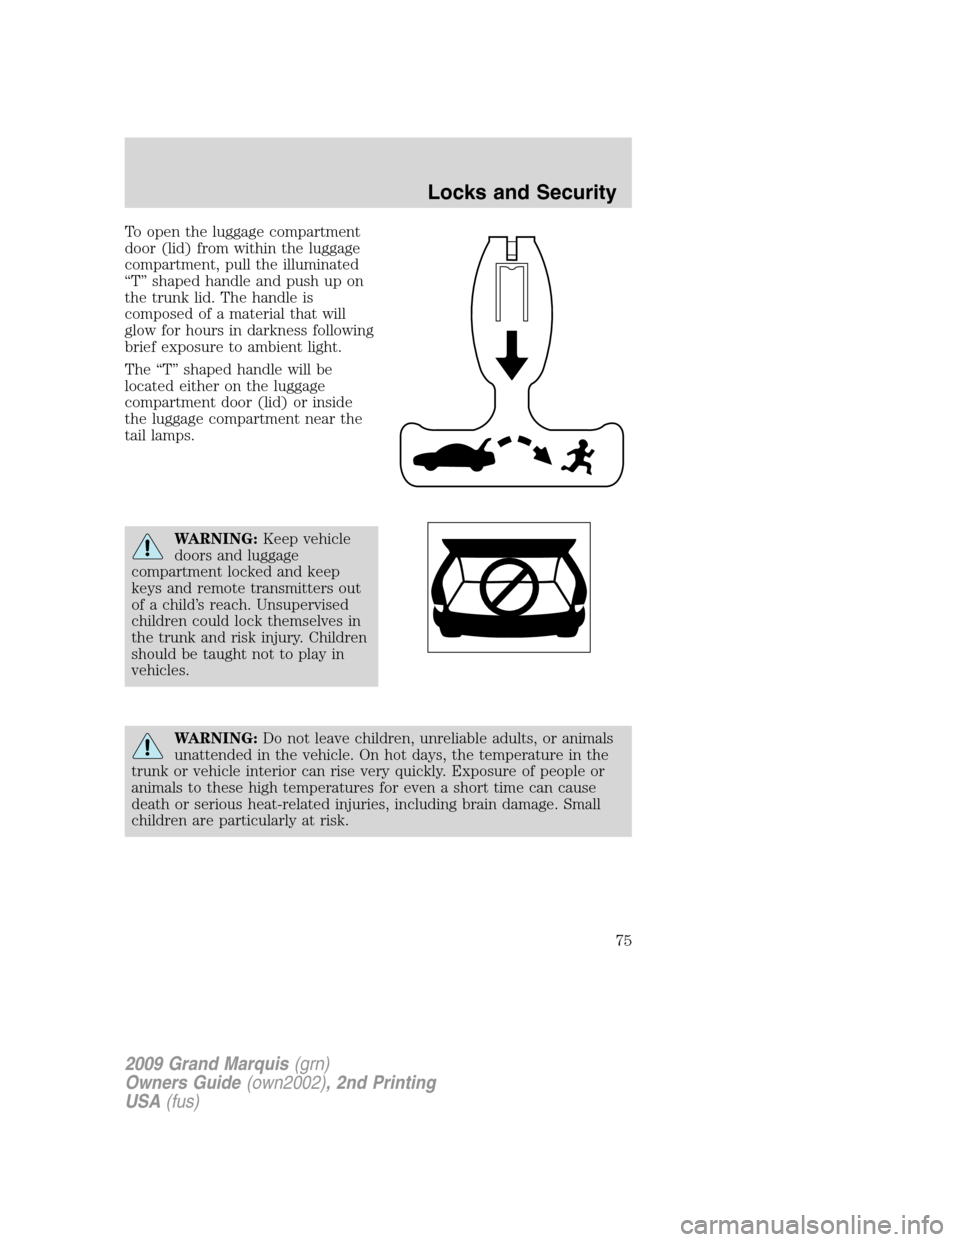 Mercury Grand Marquis 2009  s Owners Guide To open the luggage compartment
door (lid) from within the luggage
compartment, pull the illuminated
“T” shaped handle and push up on
the trunk lid. The handle is
composed of a material that will
